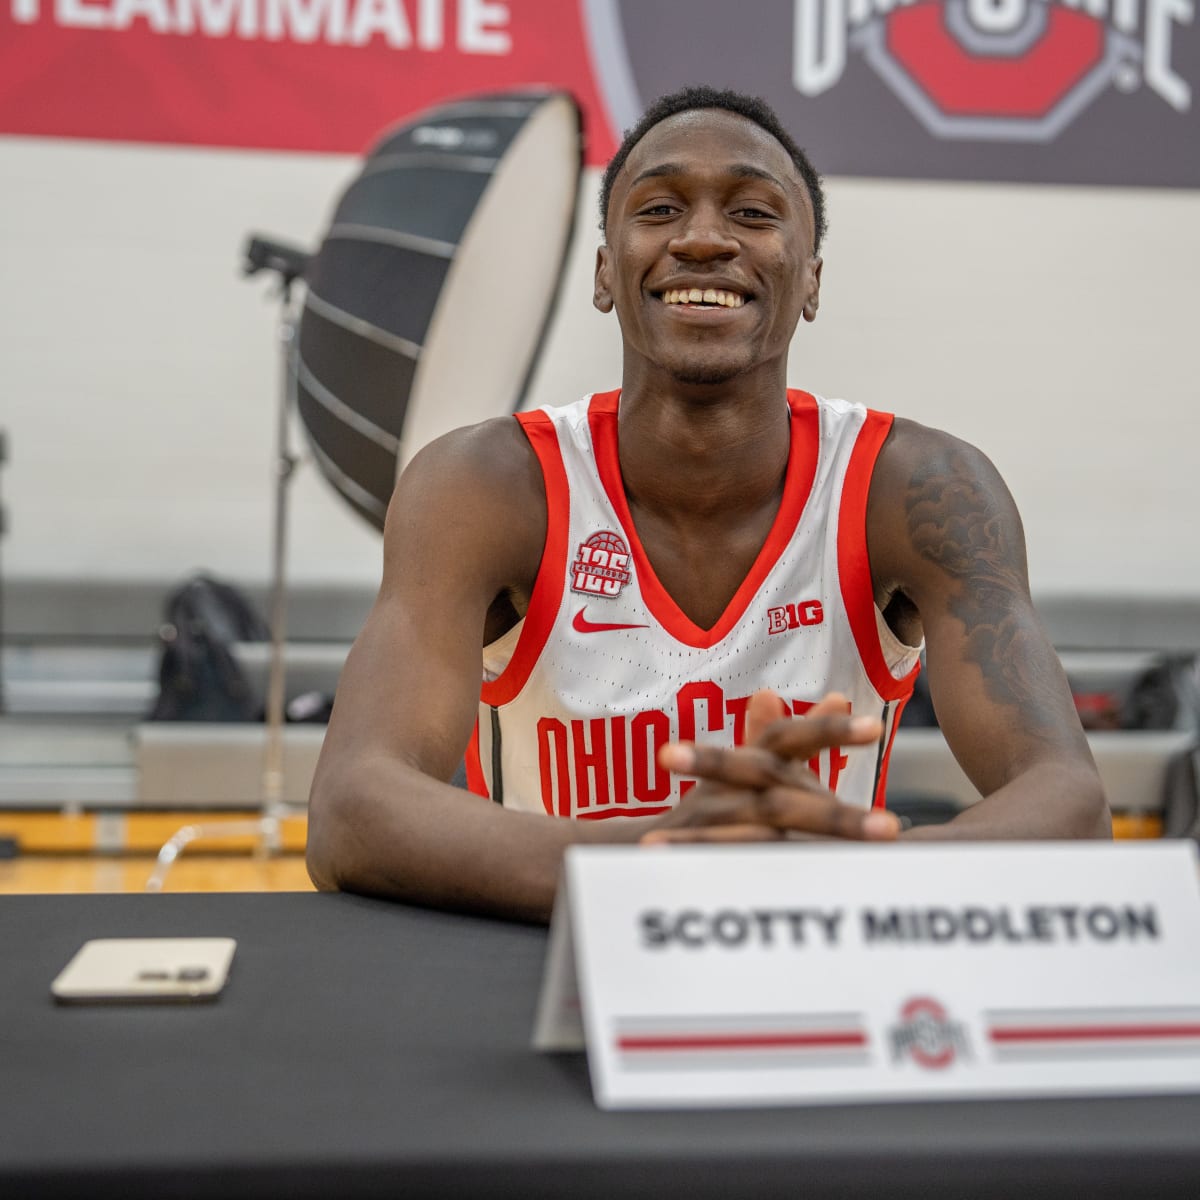 NBA Draft Scouting Report: Ohio State's Scotty Middleton - NBA Draft Digest  - Latest Draft News and Prospect Rankings